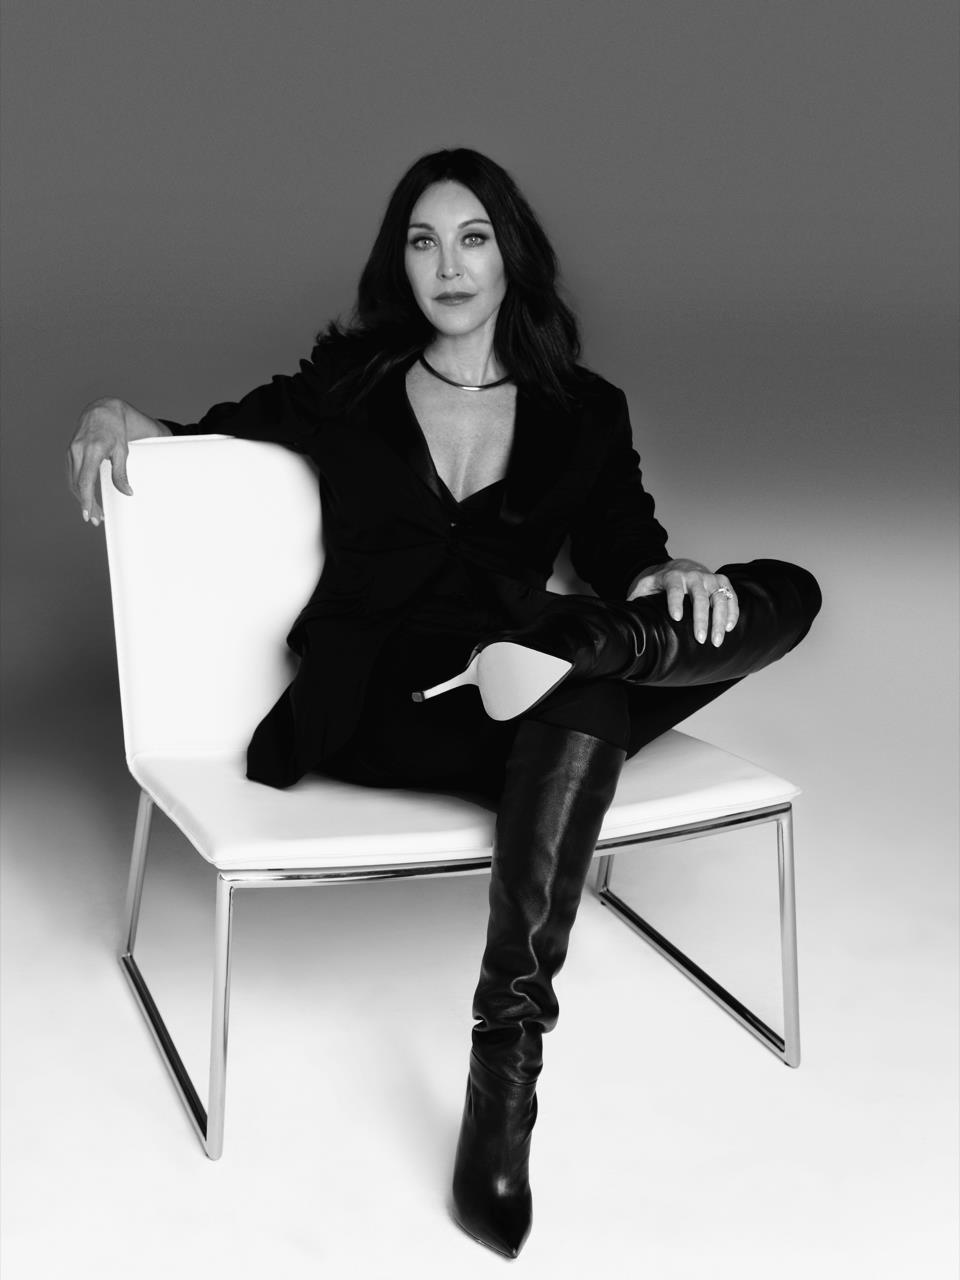 Shoe designer Tamara Mellon will discuss how to turn a passion into a career.